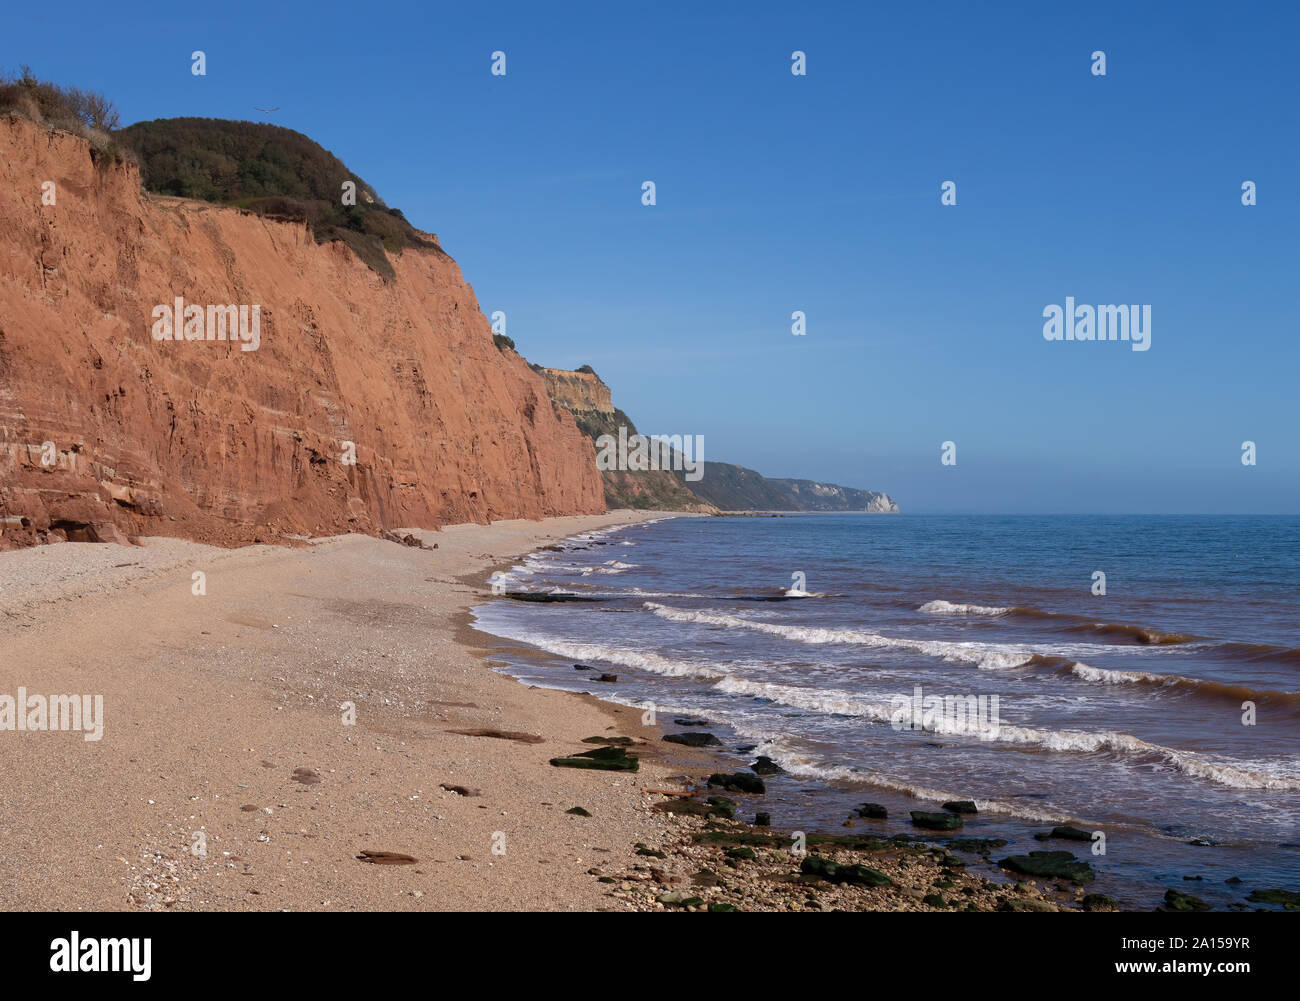 The famous Jurassic Coast red cliffs at Sidmouth, Devon, England. Looking East from Sidmouth Beach. No people. Stock Photo